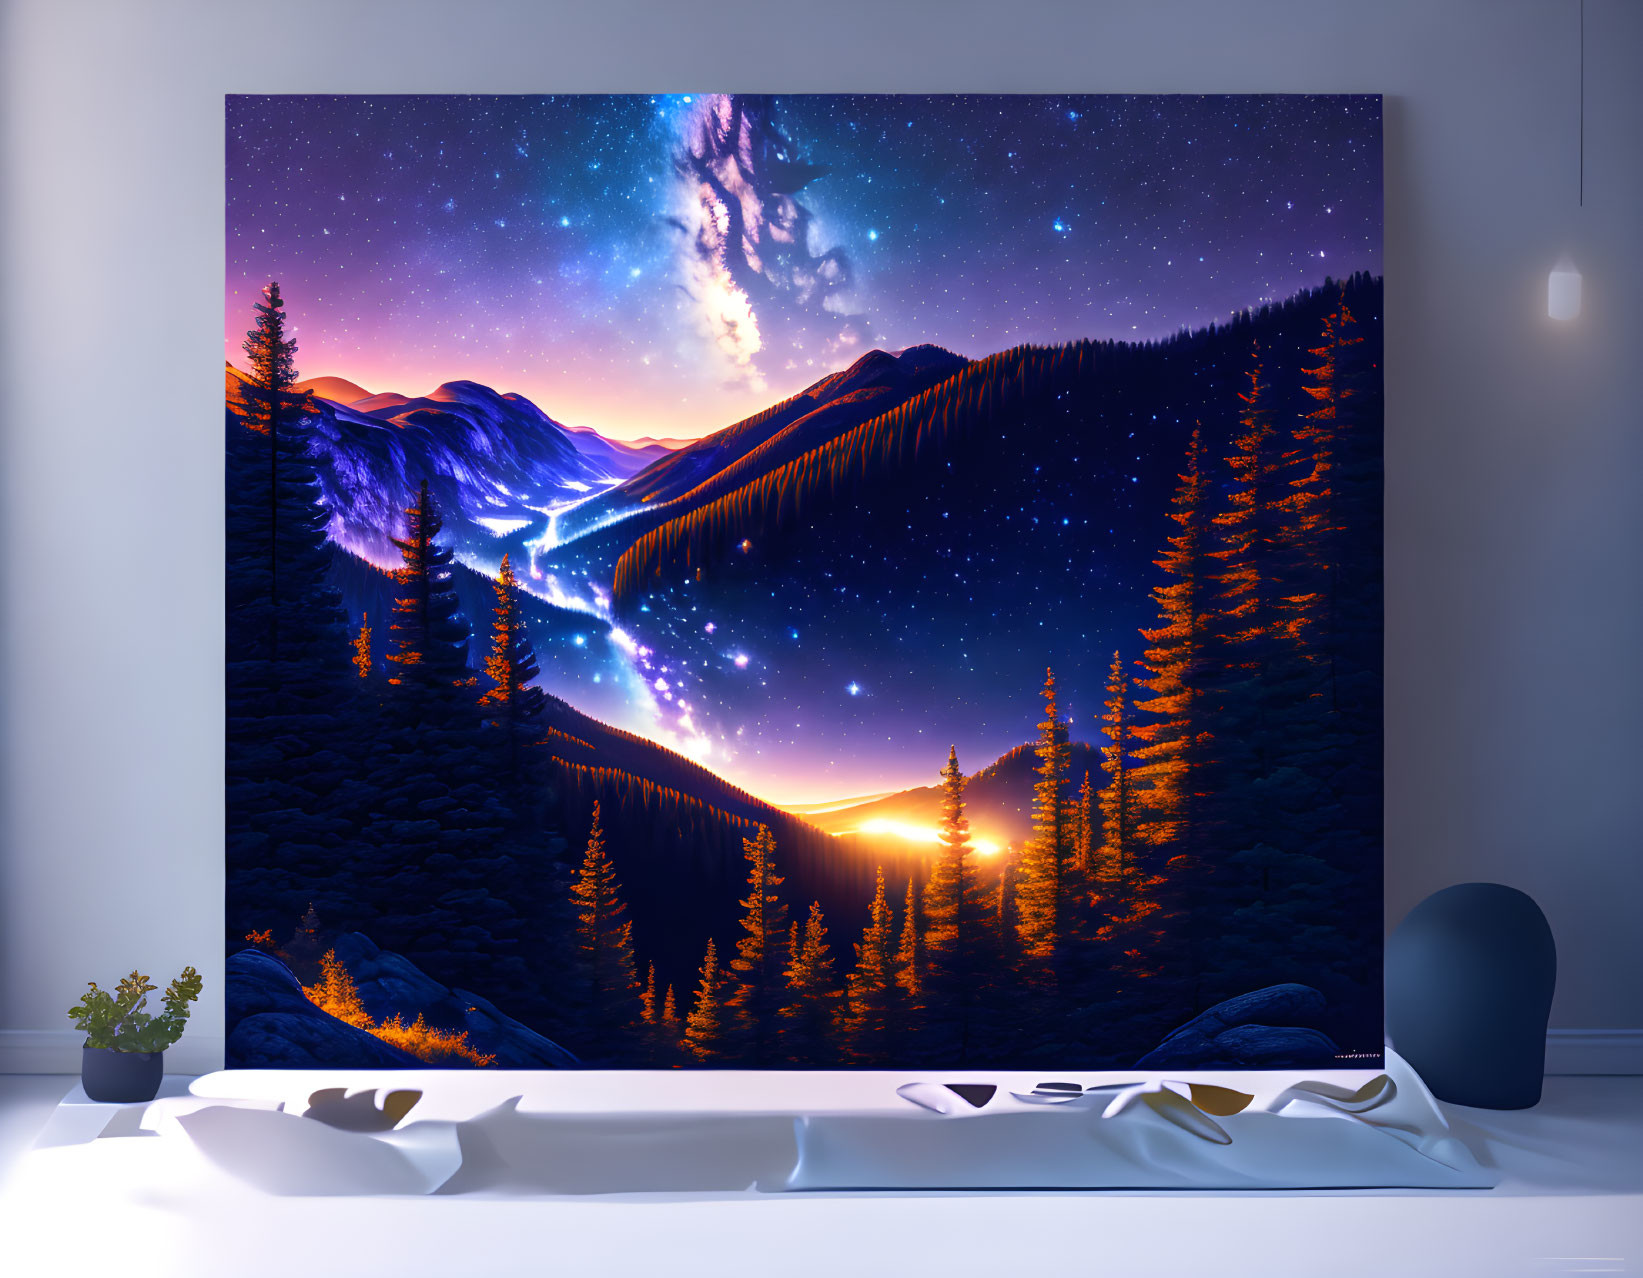 Colorful night landscape wall art with mountains, forest, starry sky, and nebula in interior